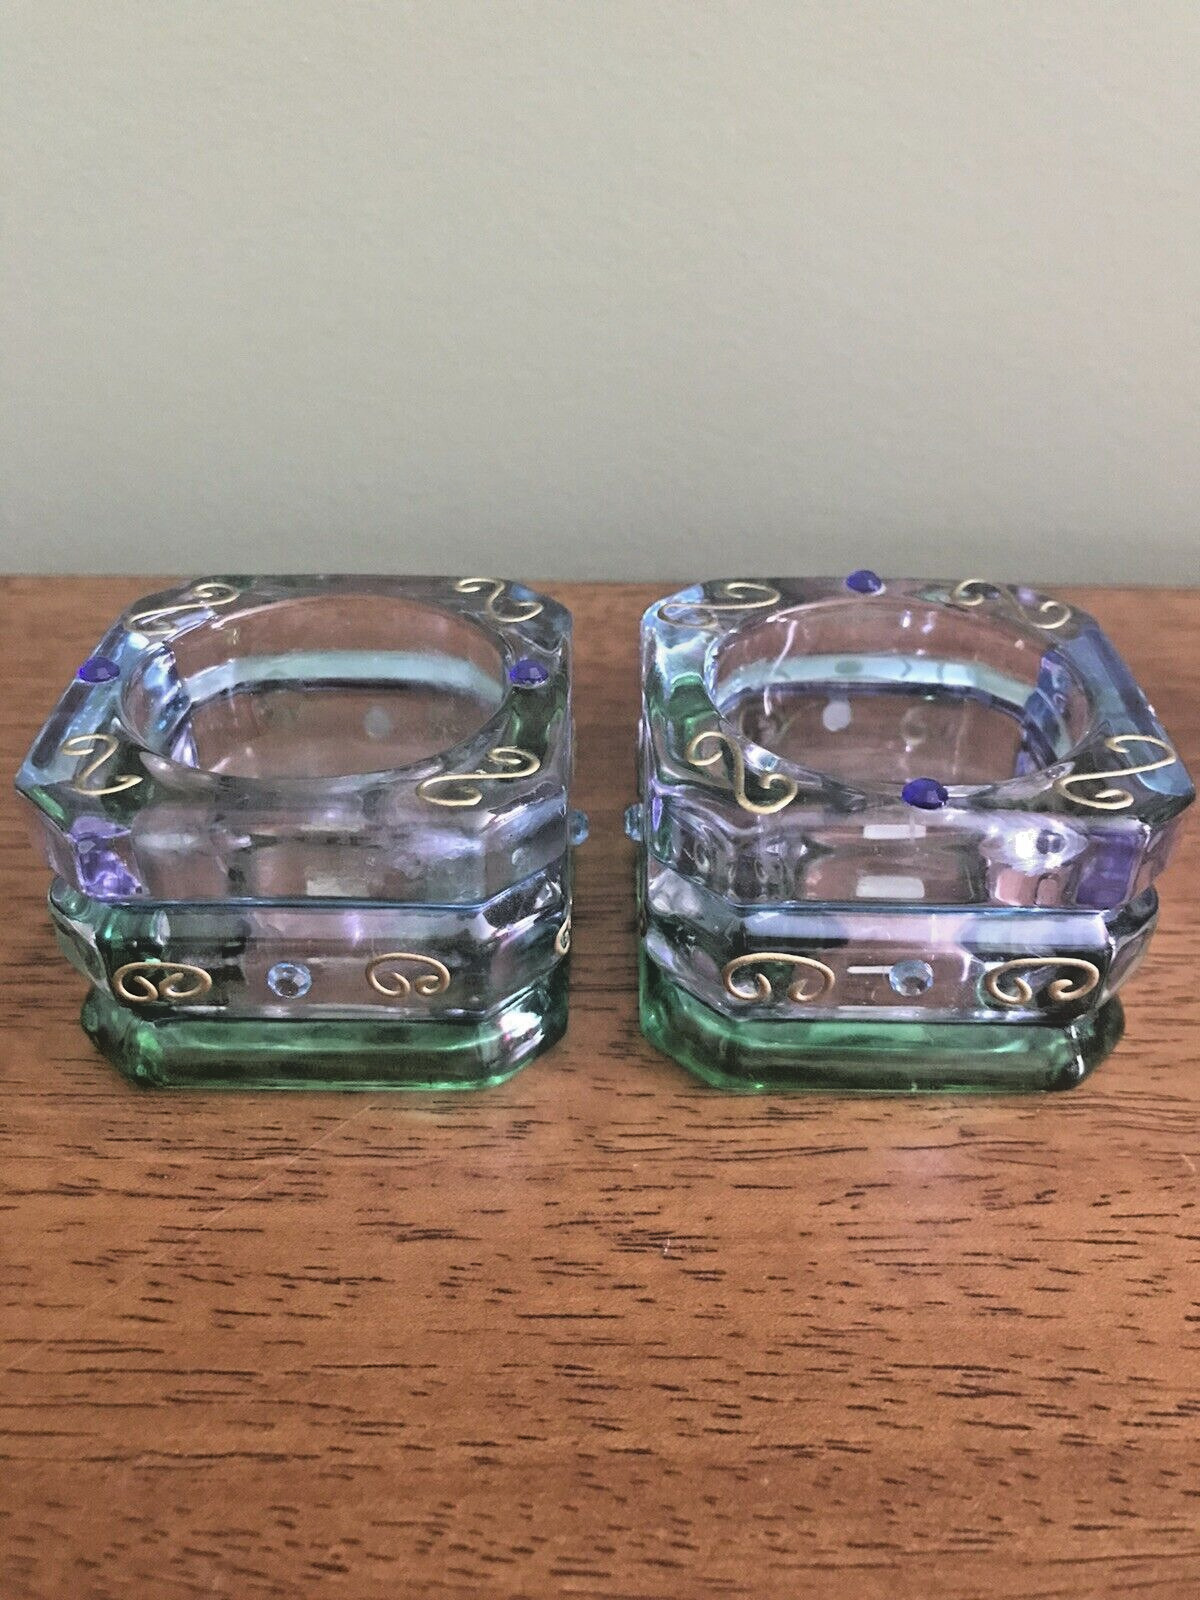 OT OF TWO PARTYLITE MARTI GRAS TEALIGHT CANDLE HOLDERS GLASS VINTAGE RETIRED